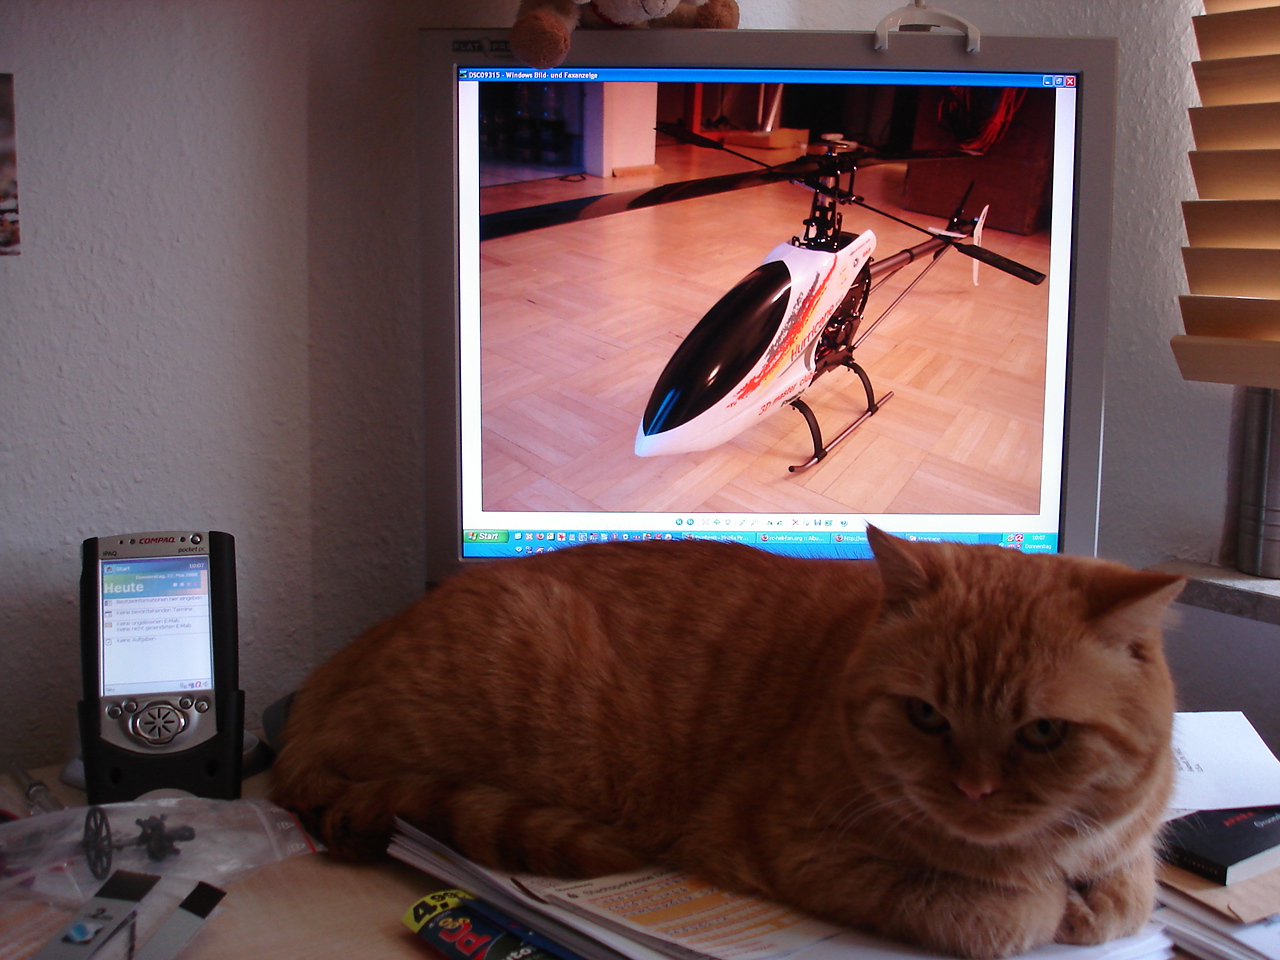 Mein Kater hat auch interesse an Helis :)